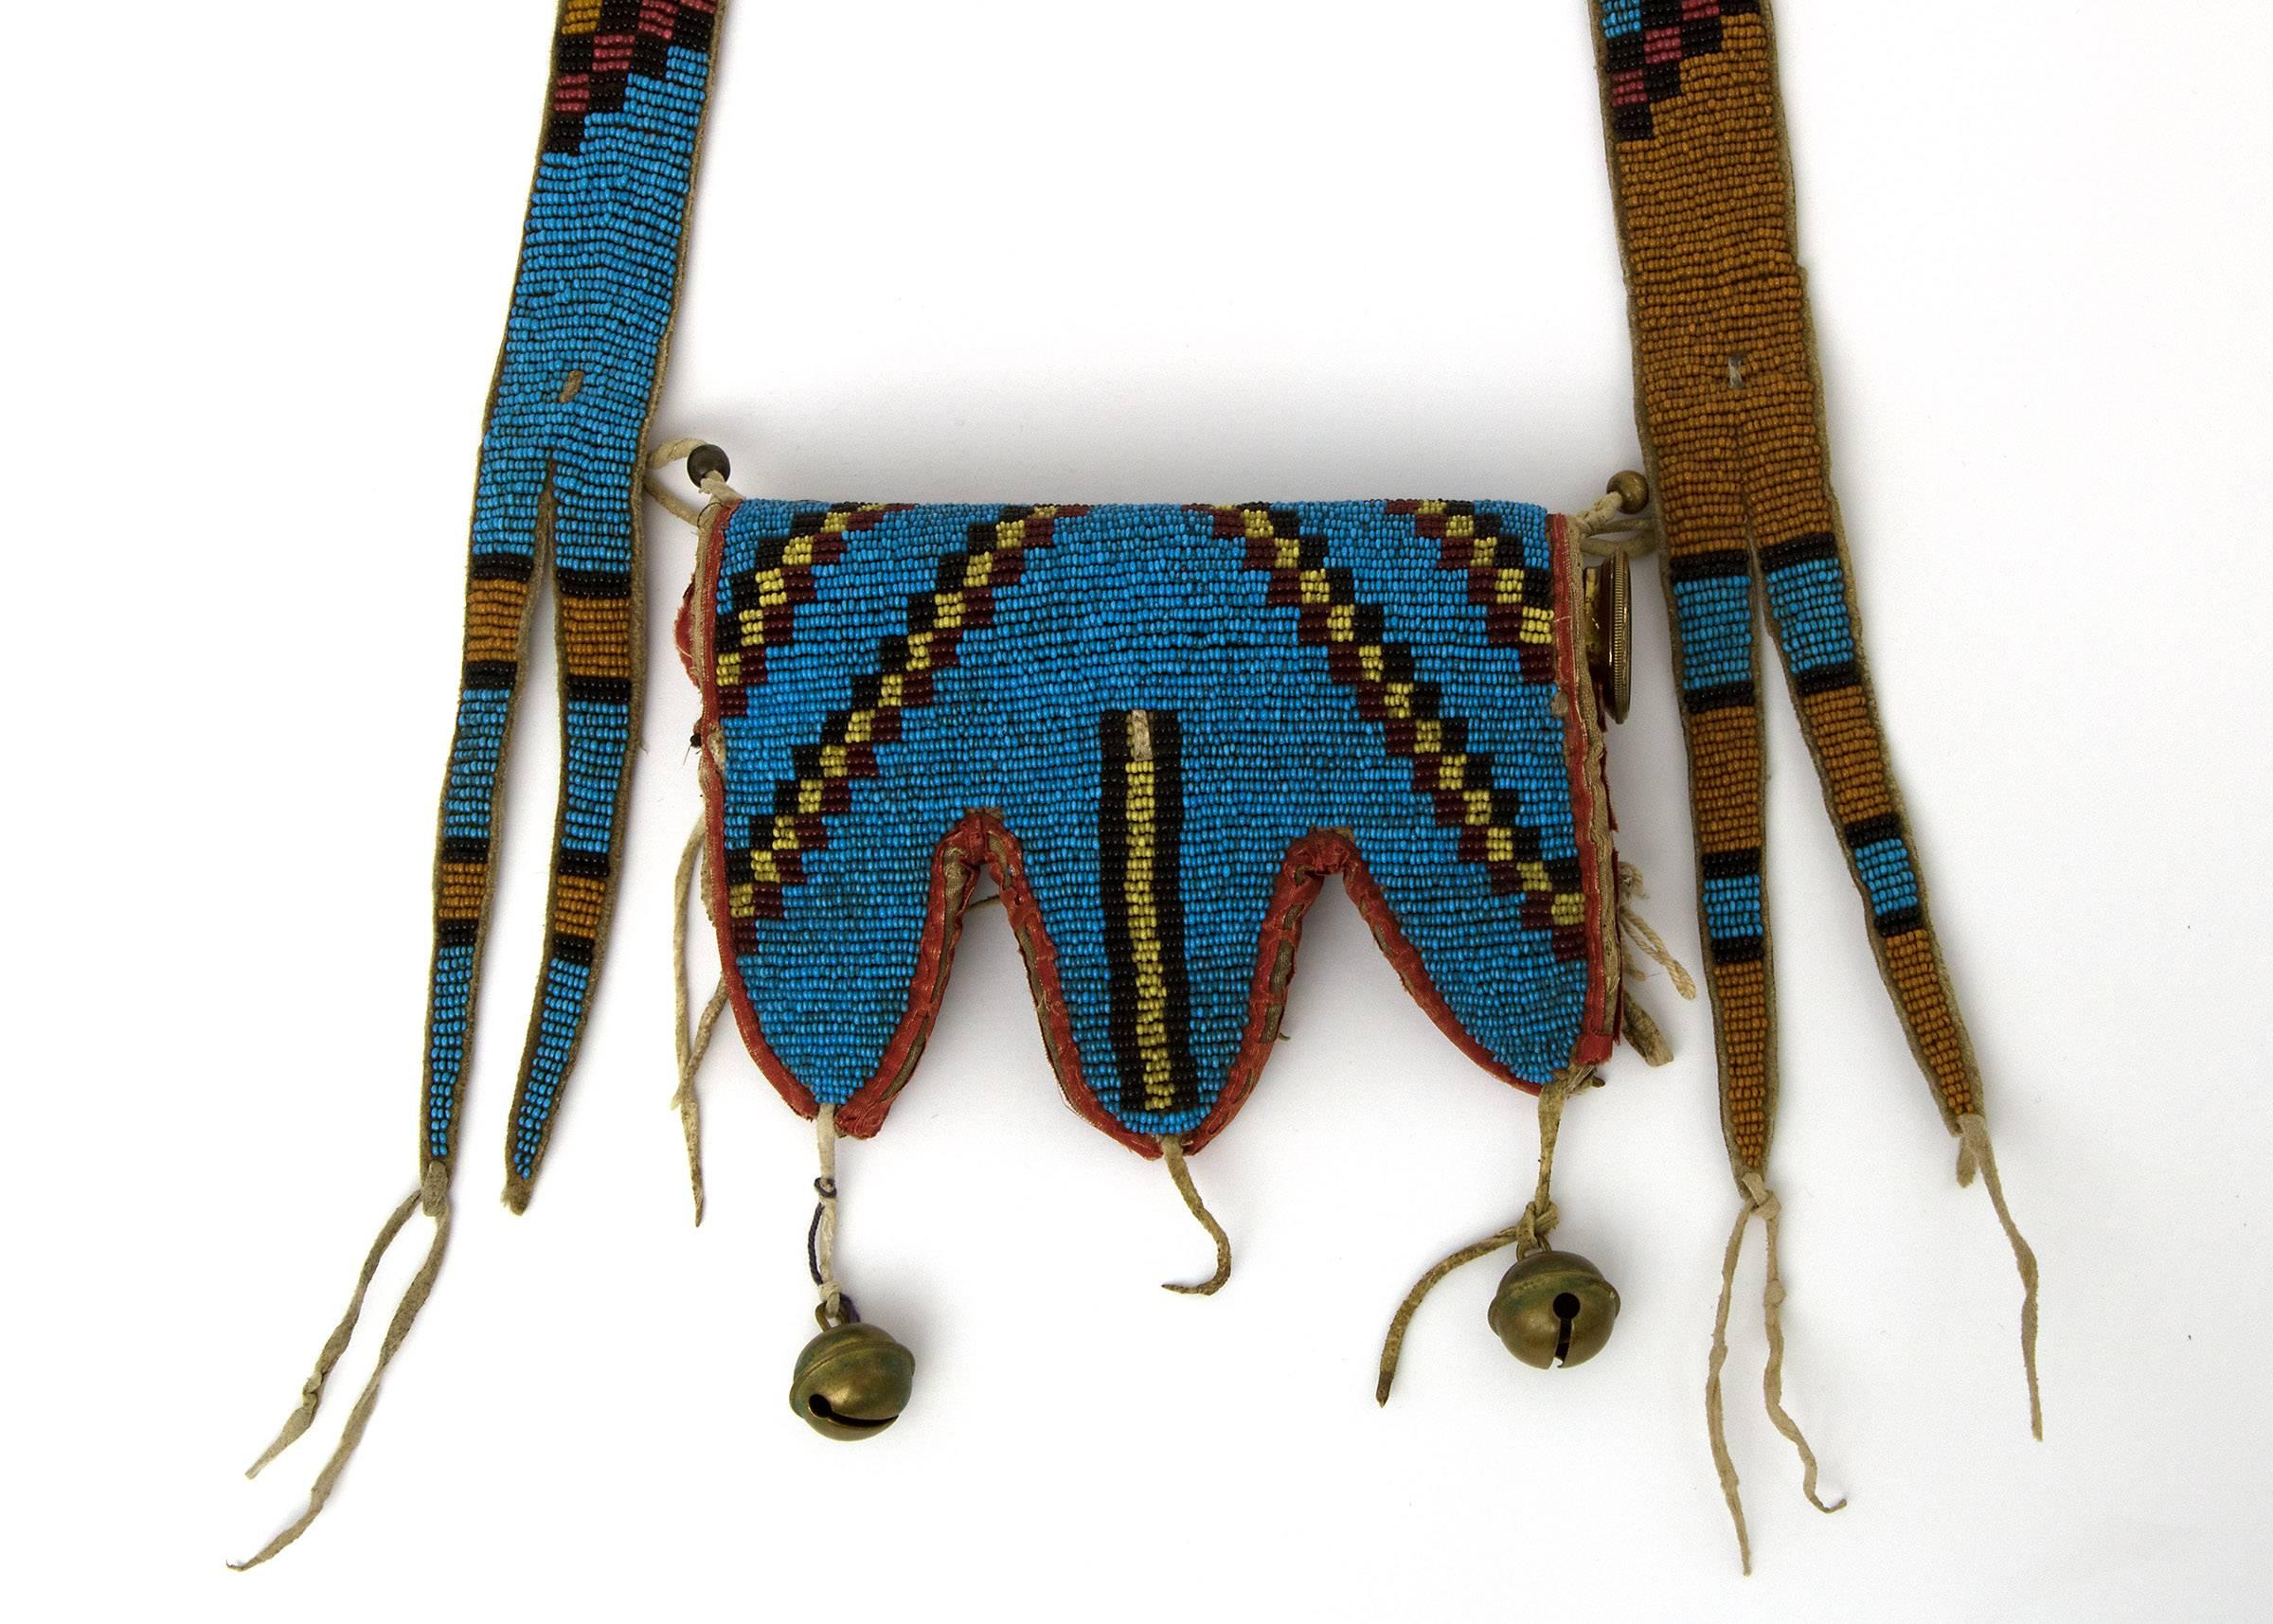 A 19th century American Indian beaded telescope case (Blackfoot/Blackfeet). The case is composed of native tanned hide and beaded in red, yellow, pumpkin and black trade beads in geometric motifs against a blue field. Bottom is edged in cotton cloth